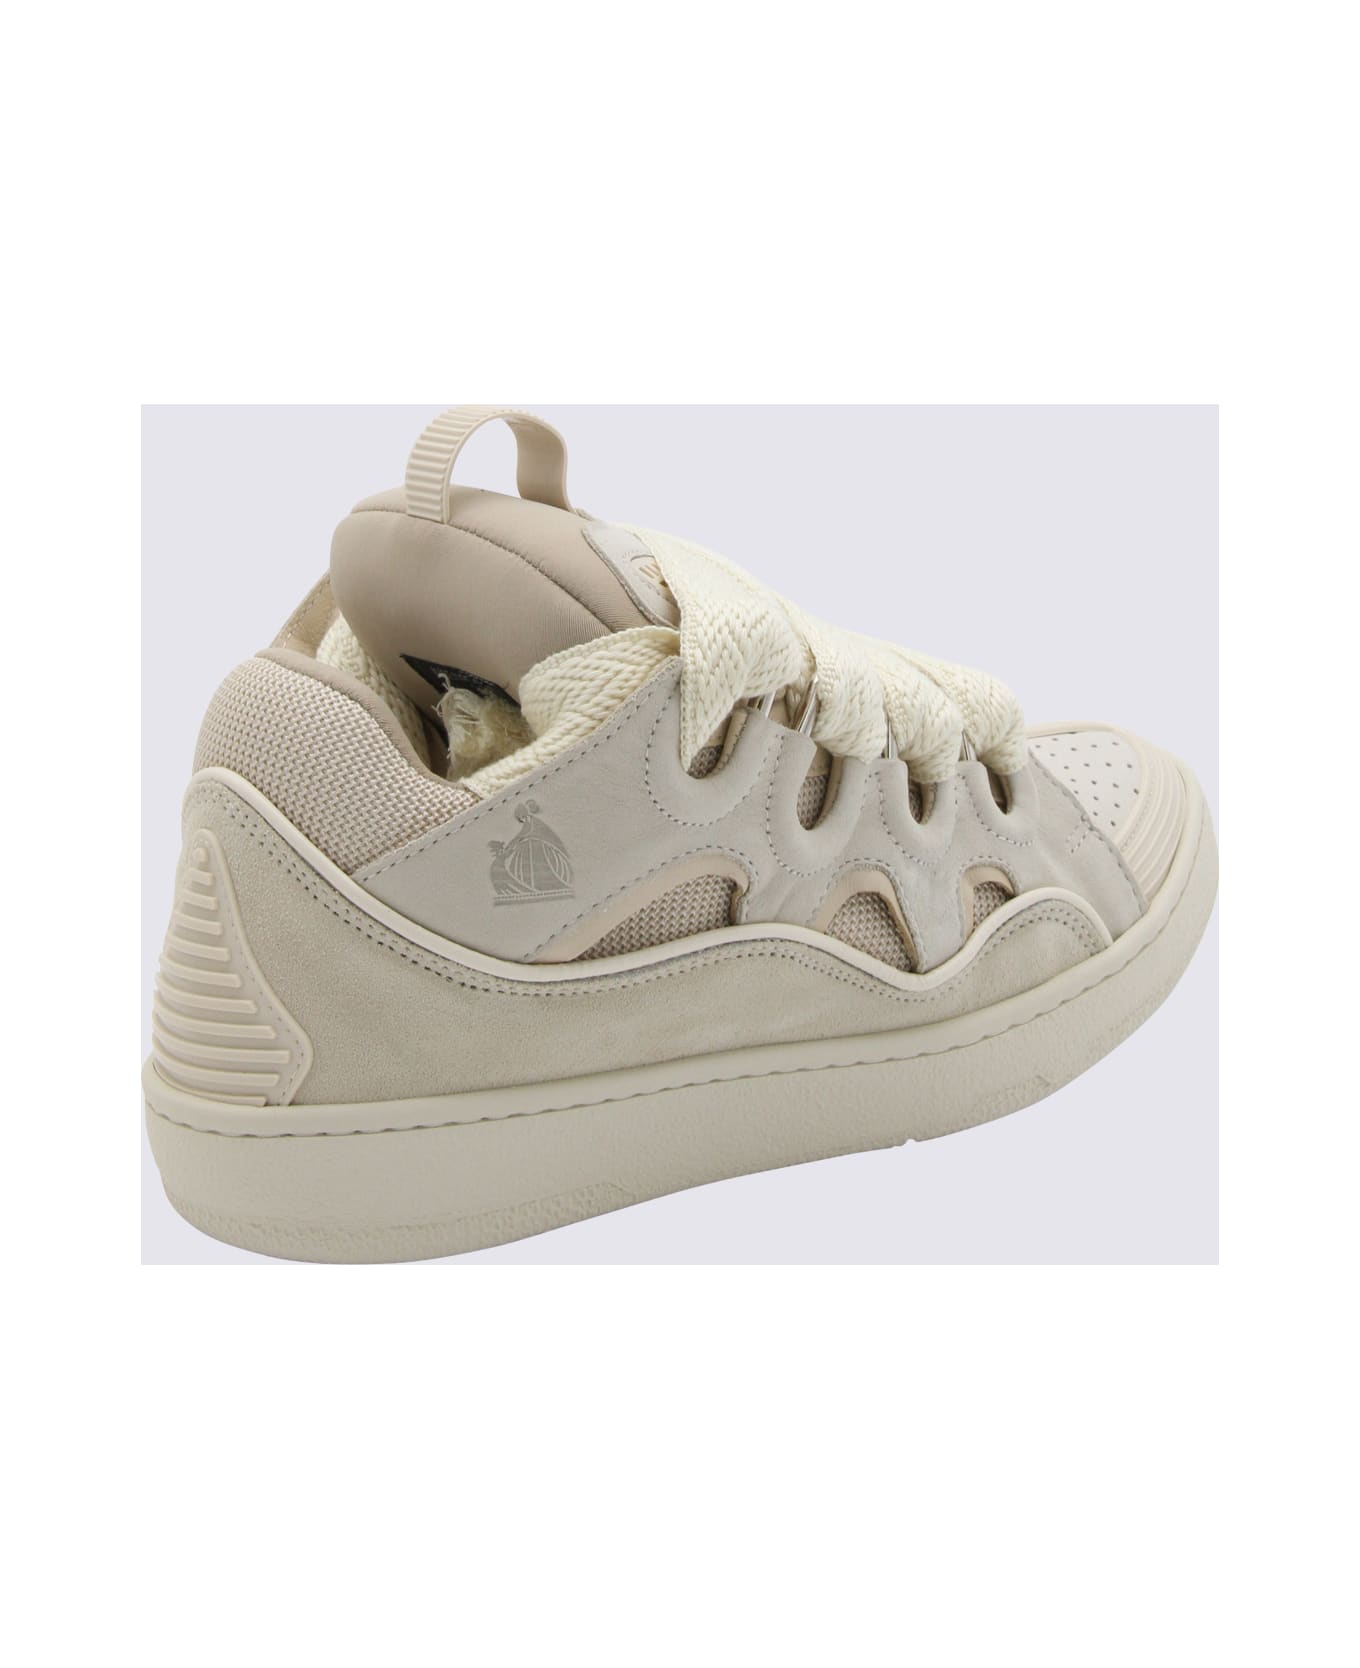 Lanvin White Leather Curb Sneakers - Beige スニーカー